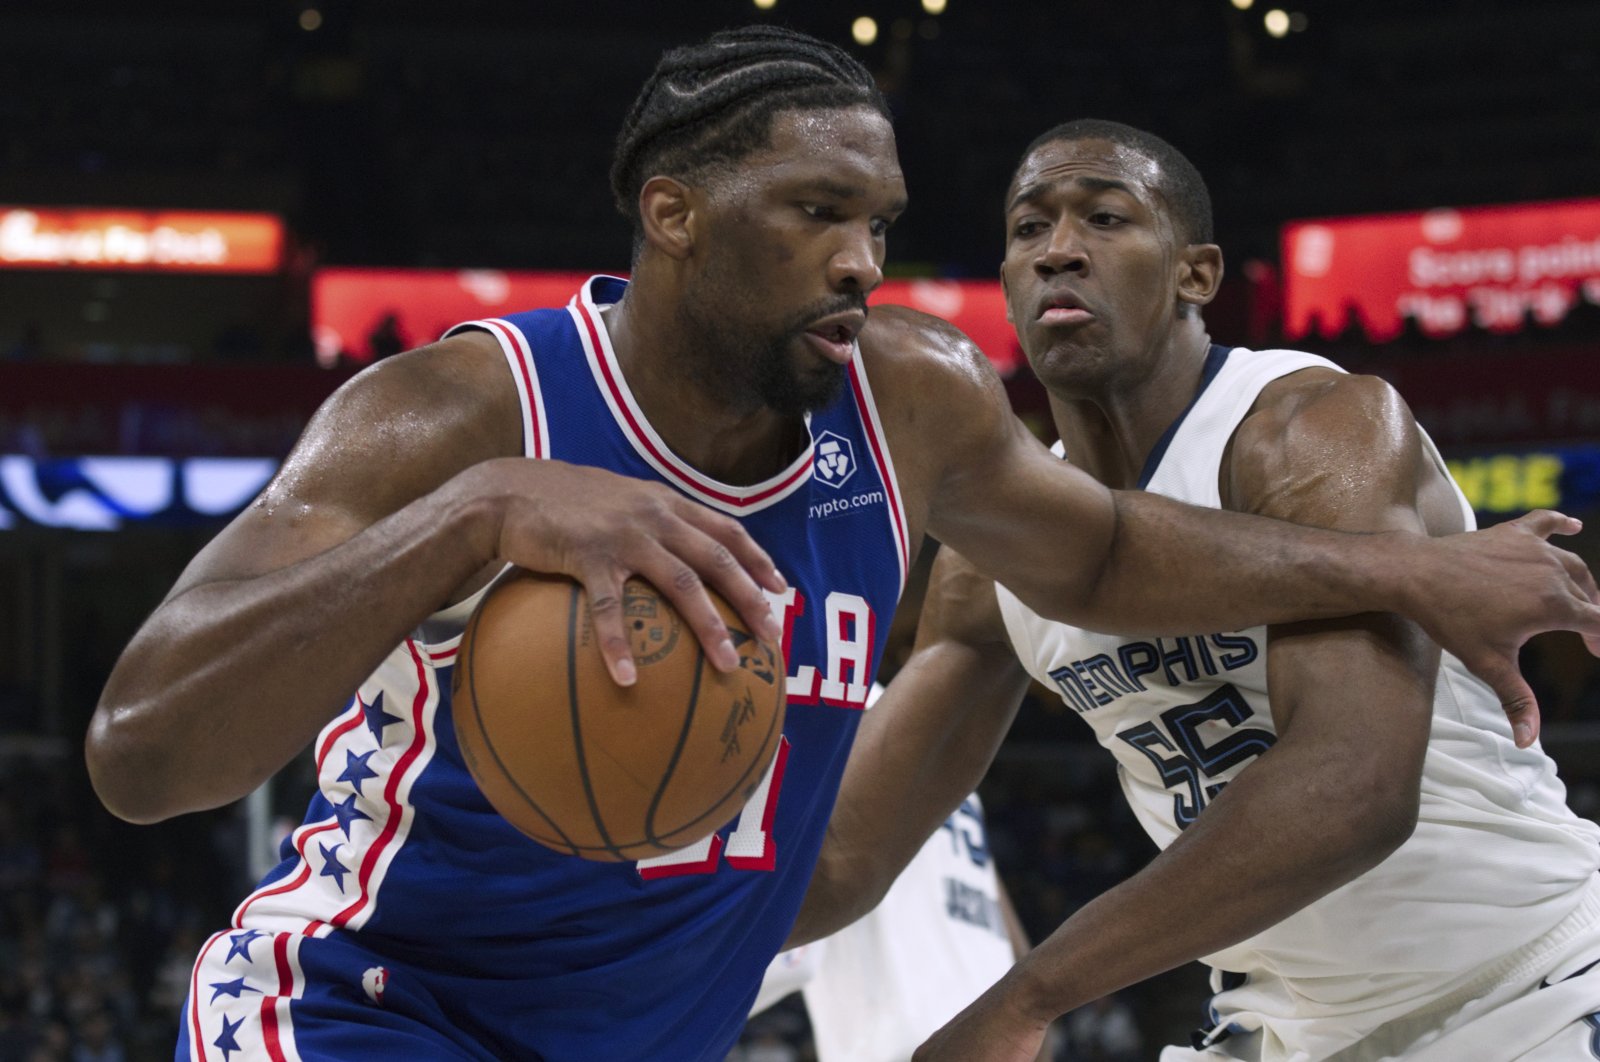 Embiid-inspired Sixers extend win streak by mauling Grizzlies